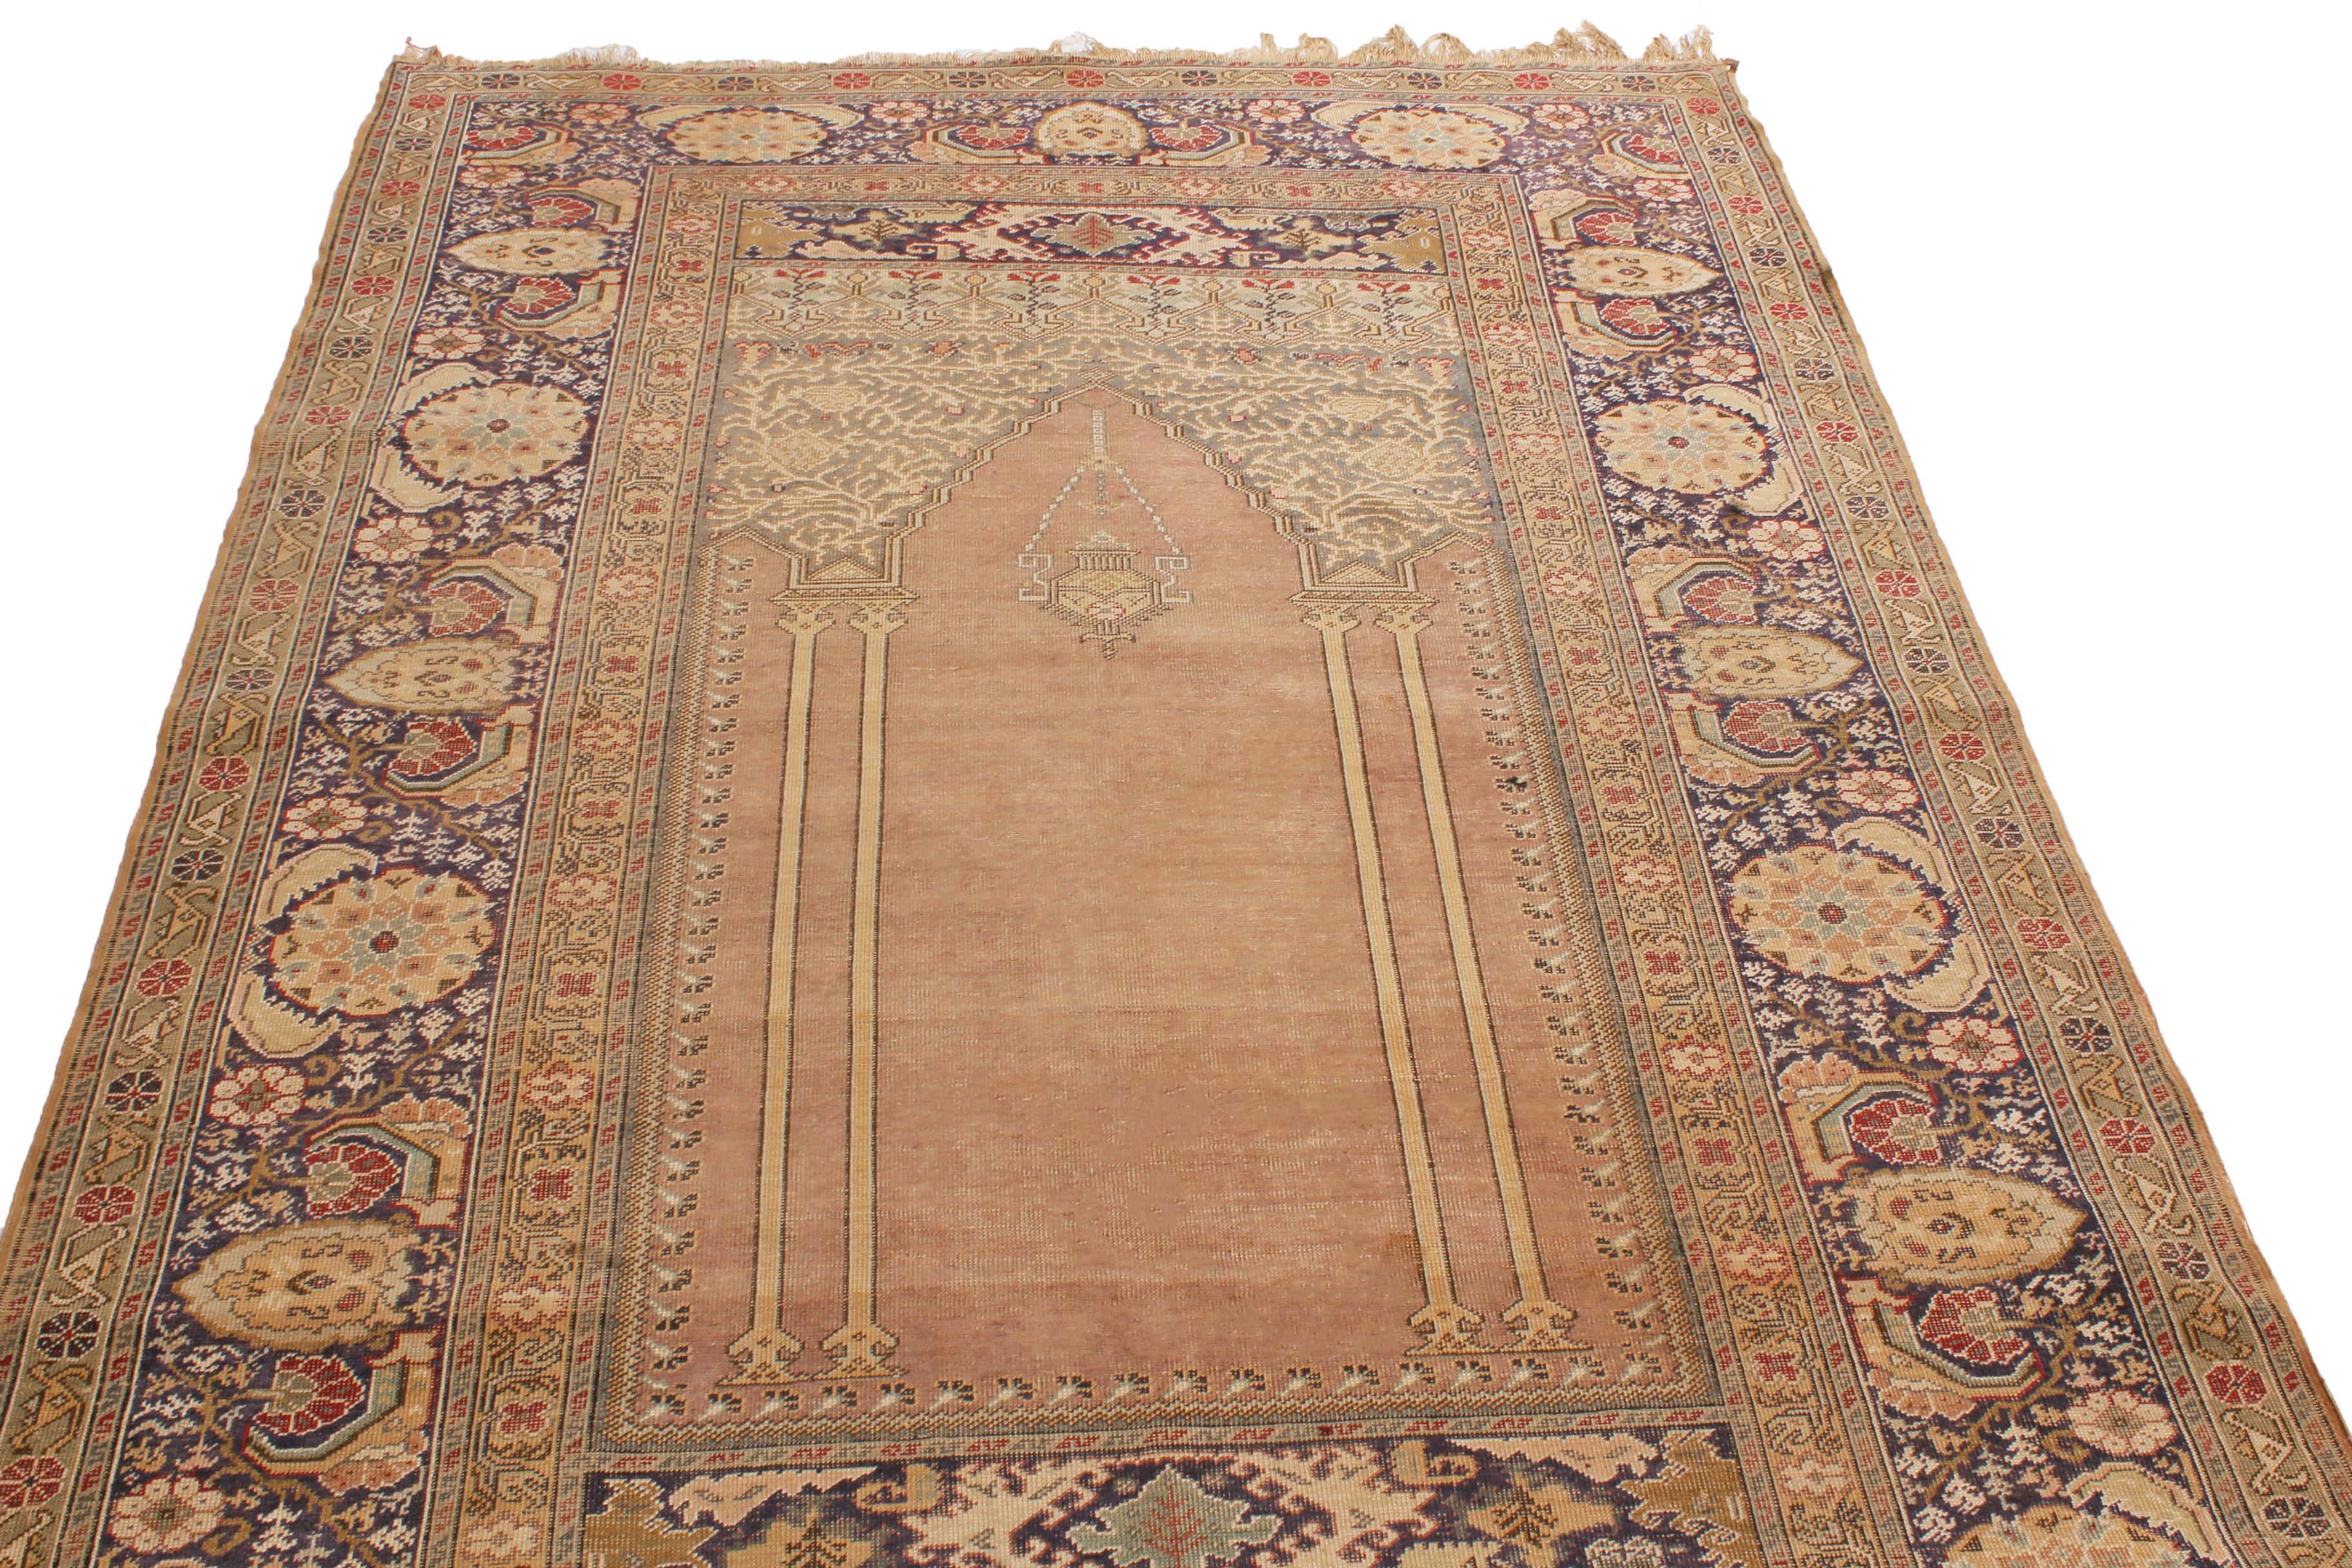 Enjoying hand knotted wool originating from Turkey in 1900, this turn of the century antique Kayseri rug utilizes one of the most distinguished, sharply woven mihrab gateway designs to complement its unique size and colourways. Featuring a bold